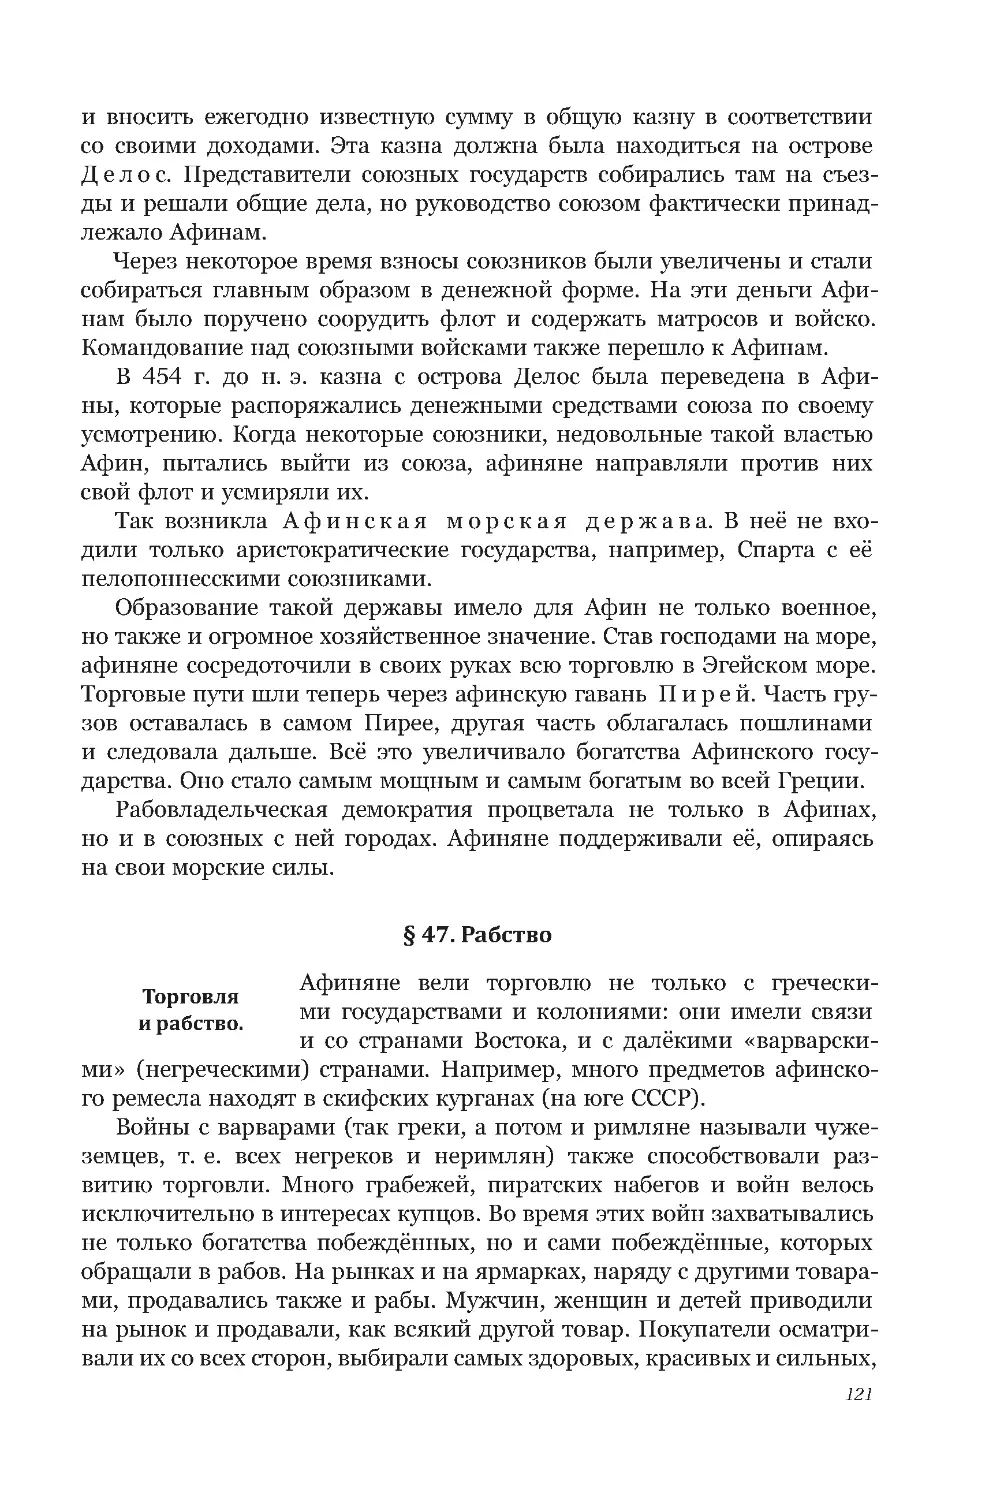 bookmark10
§ 47. Рабство